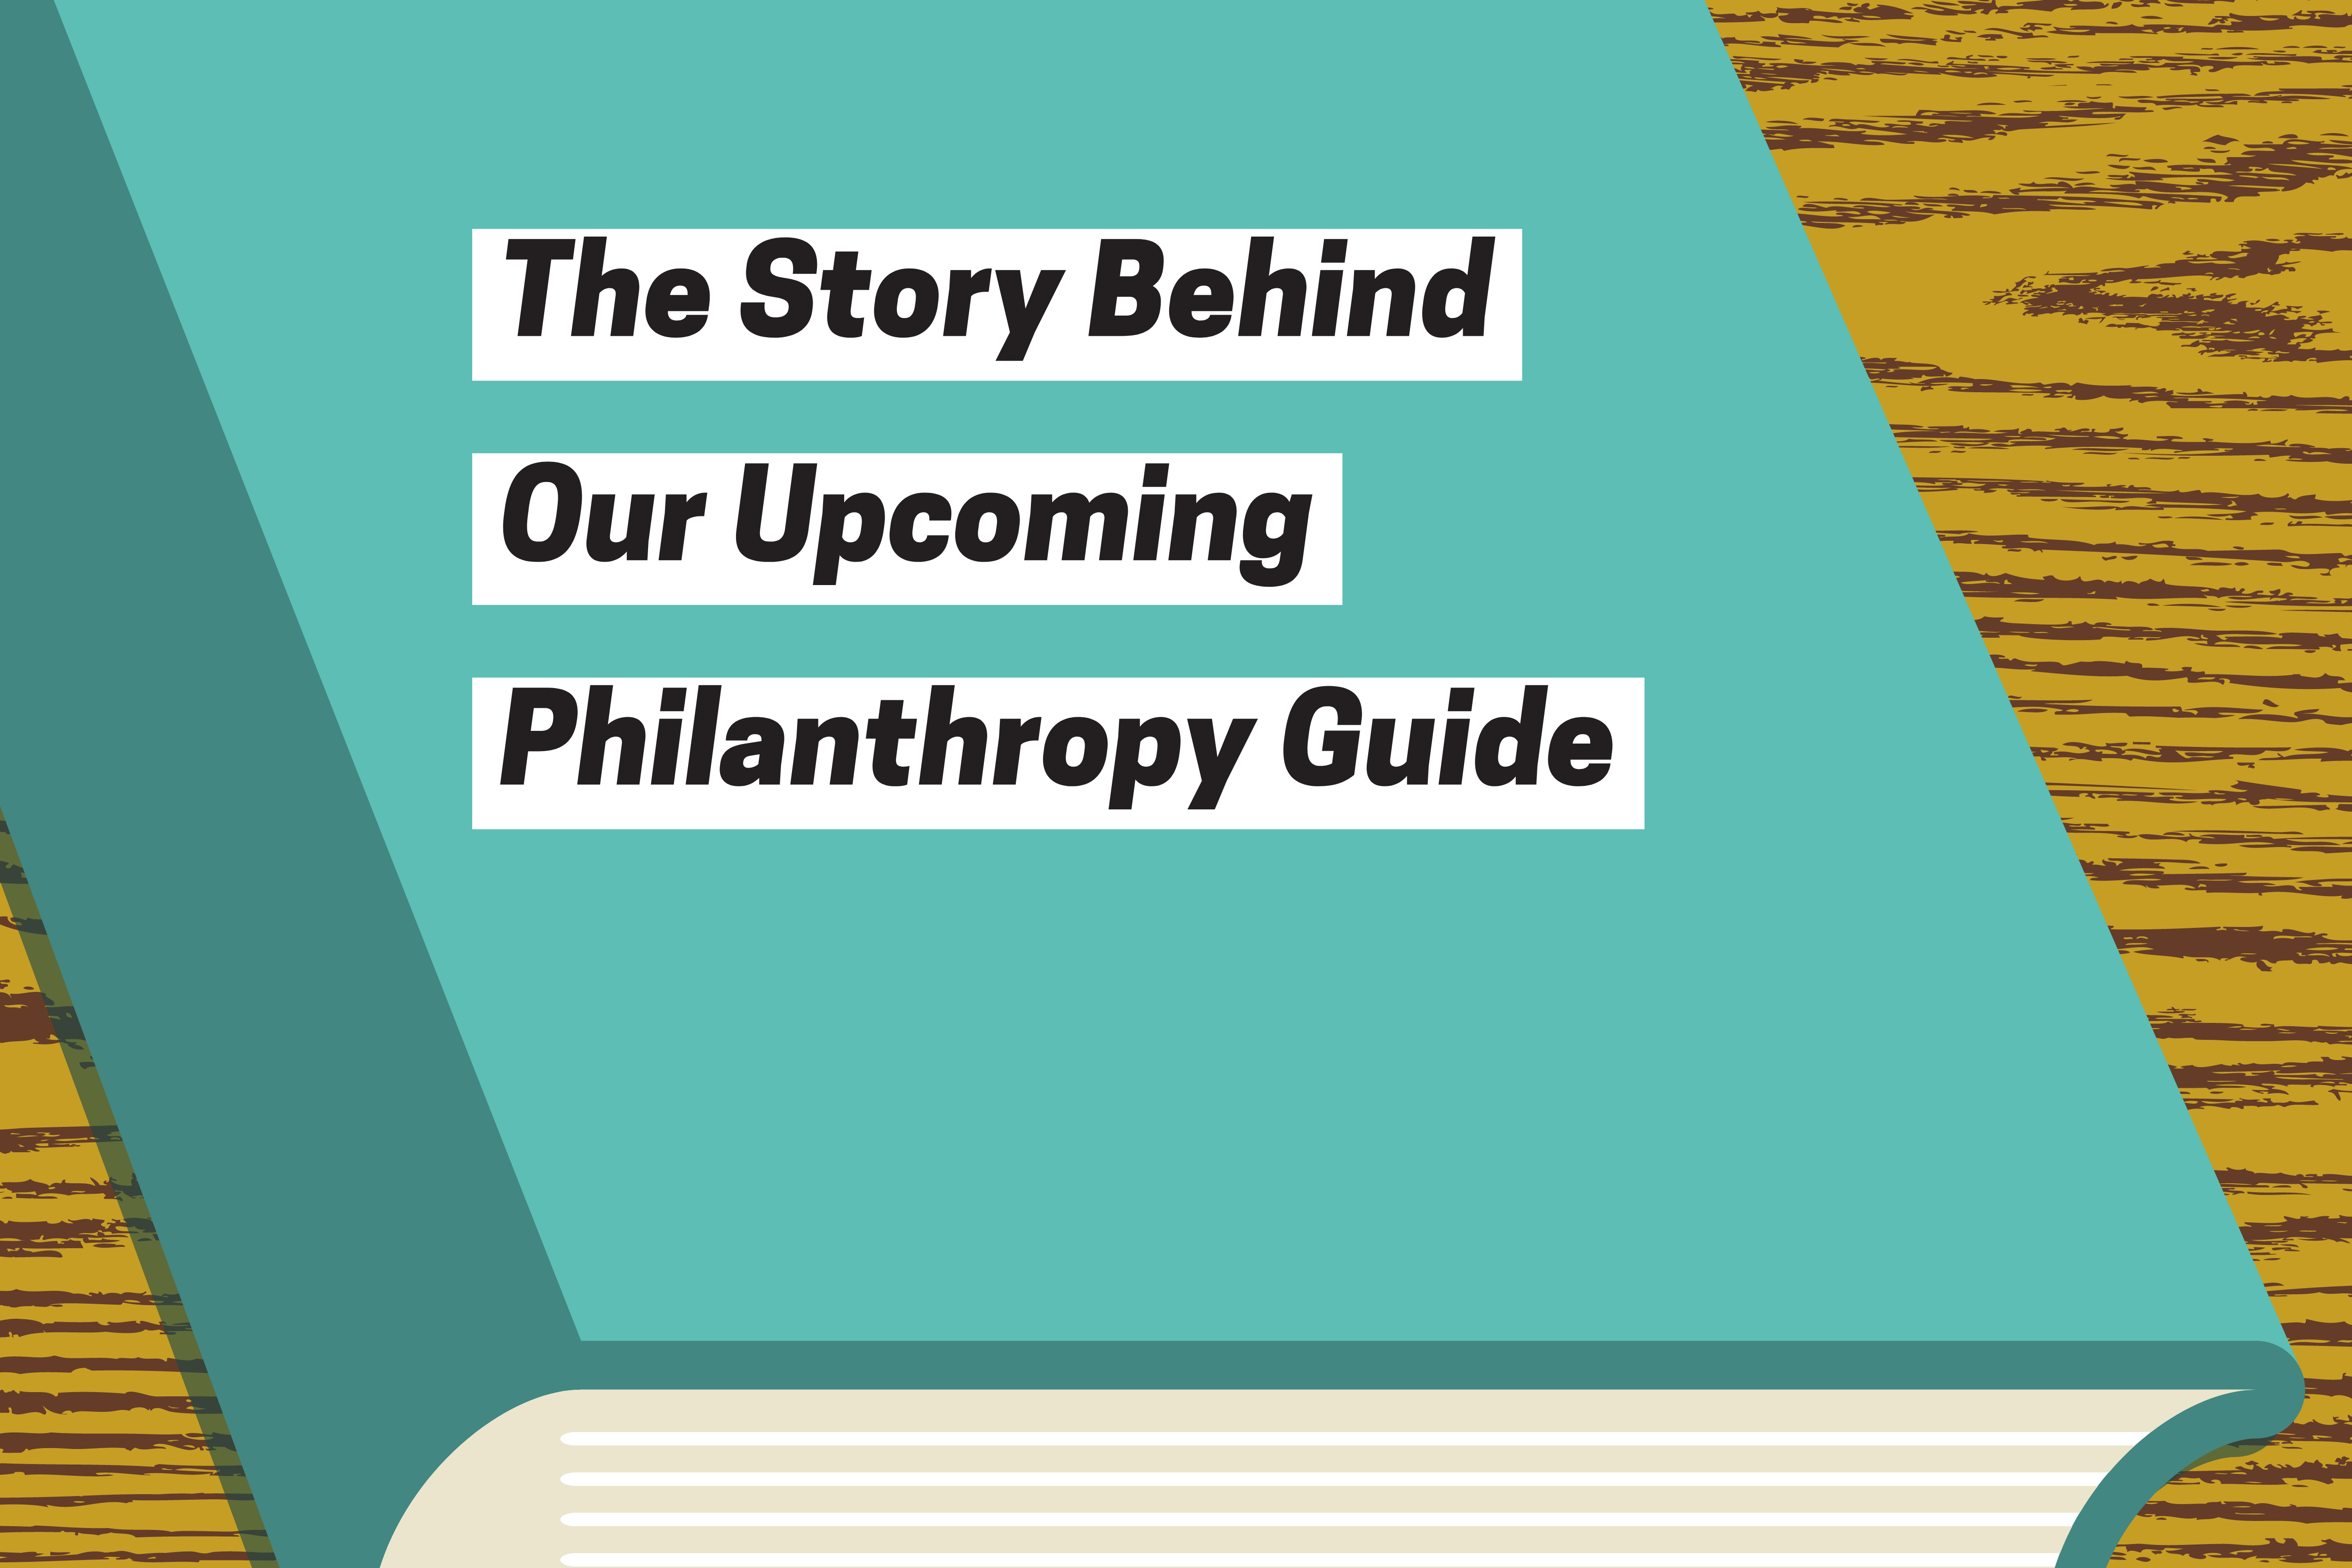 The Story Behind Our Upcoming Philanthropy Guide title on graphic image of a book on a table